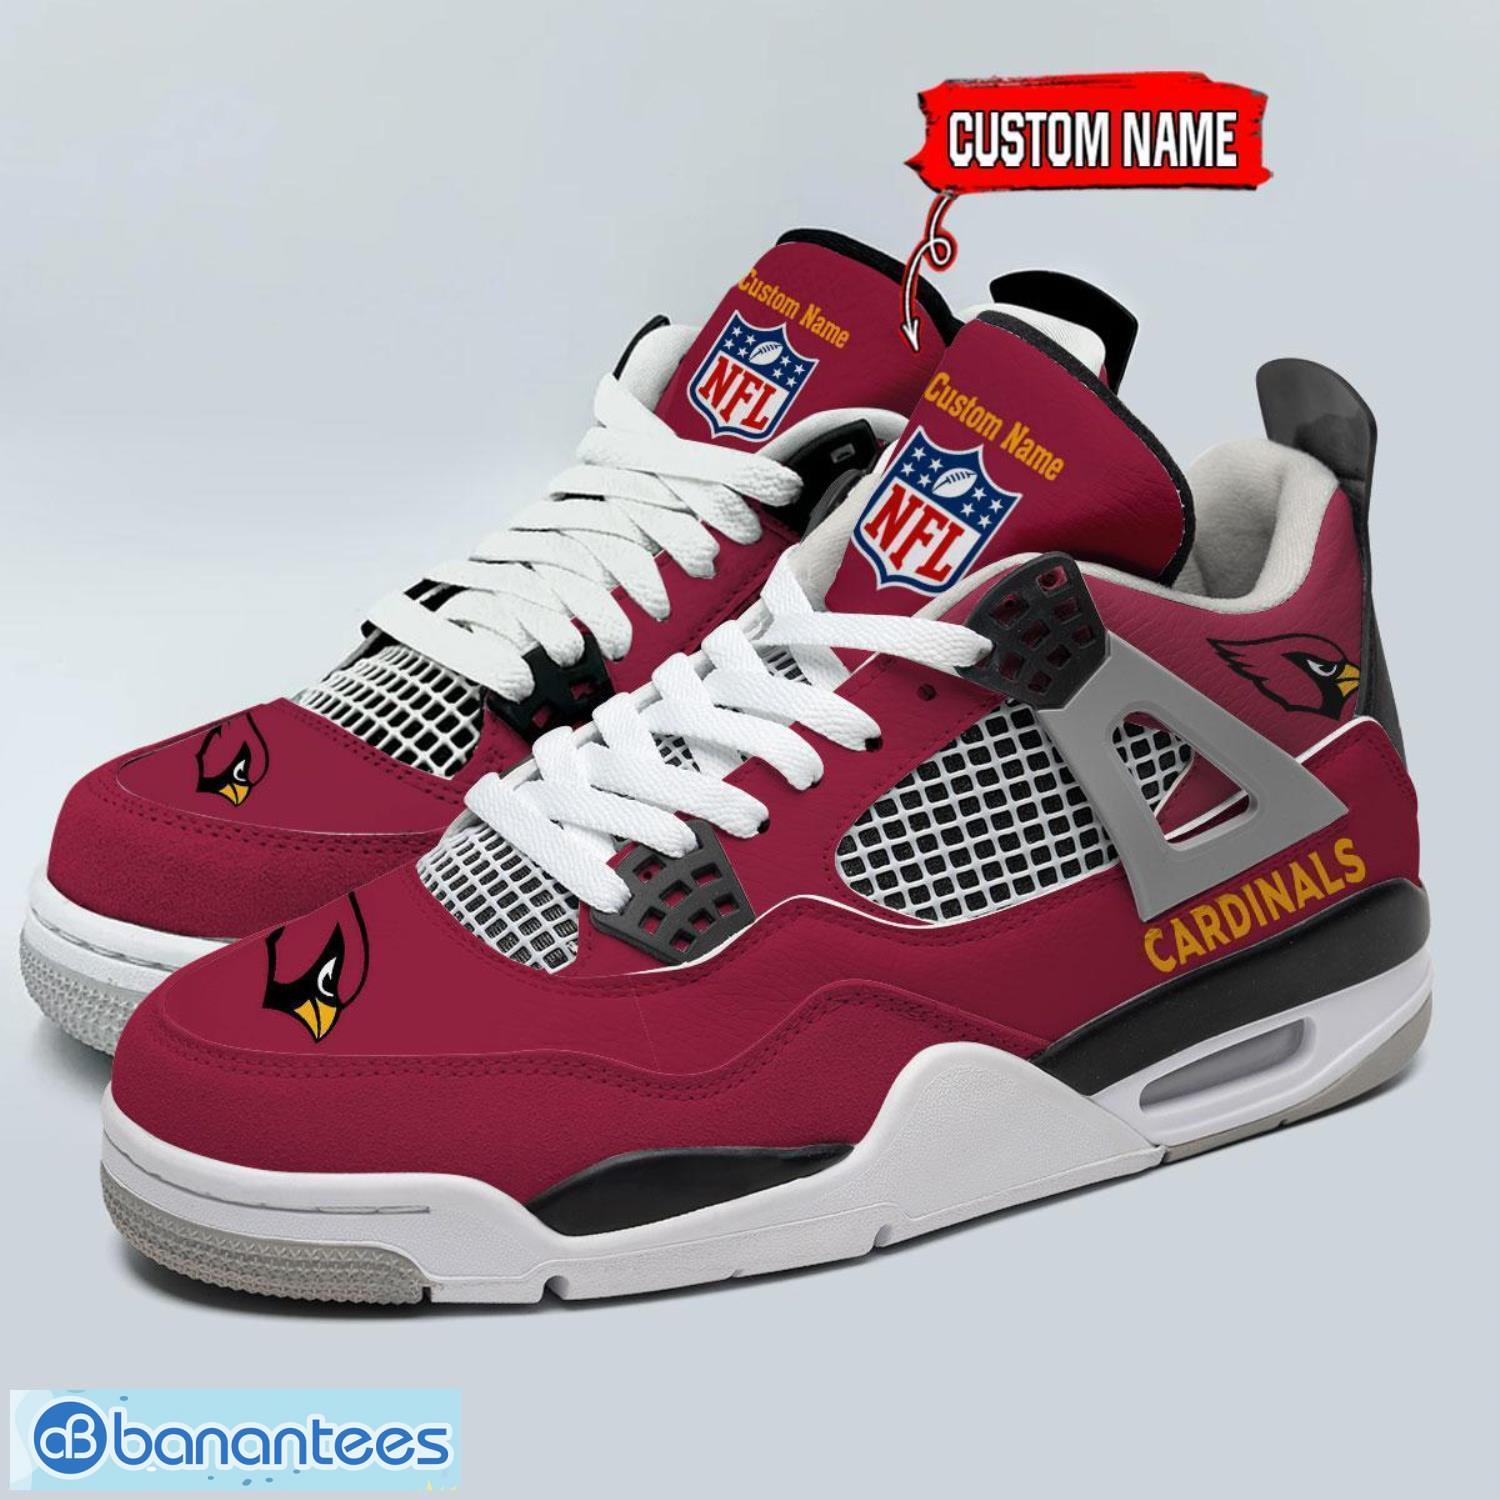 Personalized Name Arizona Cardinals Personalized Air Jordan 4 Sneakers Shoes Trending Shoes Product Photo 1